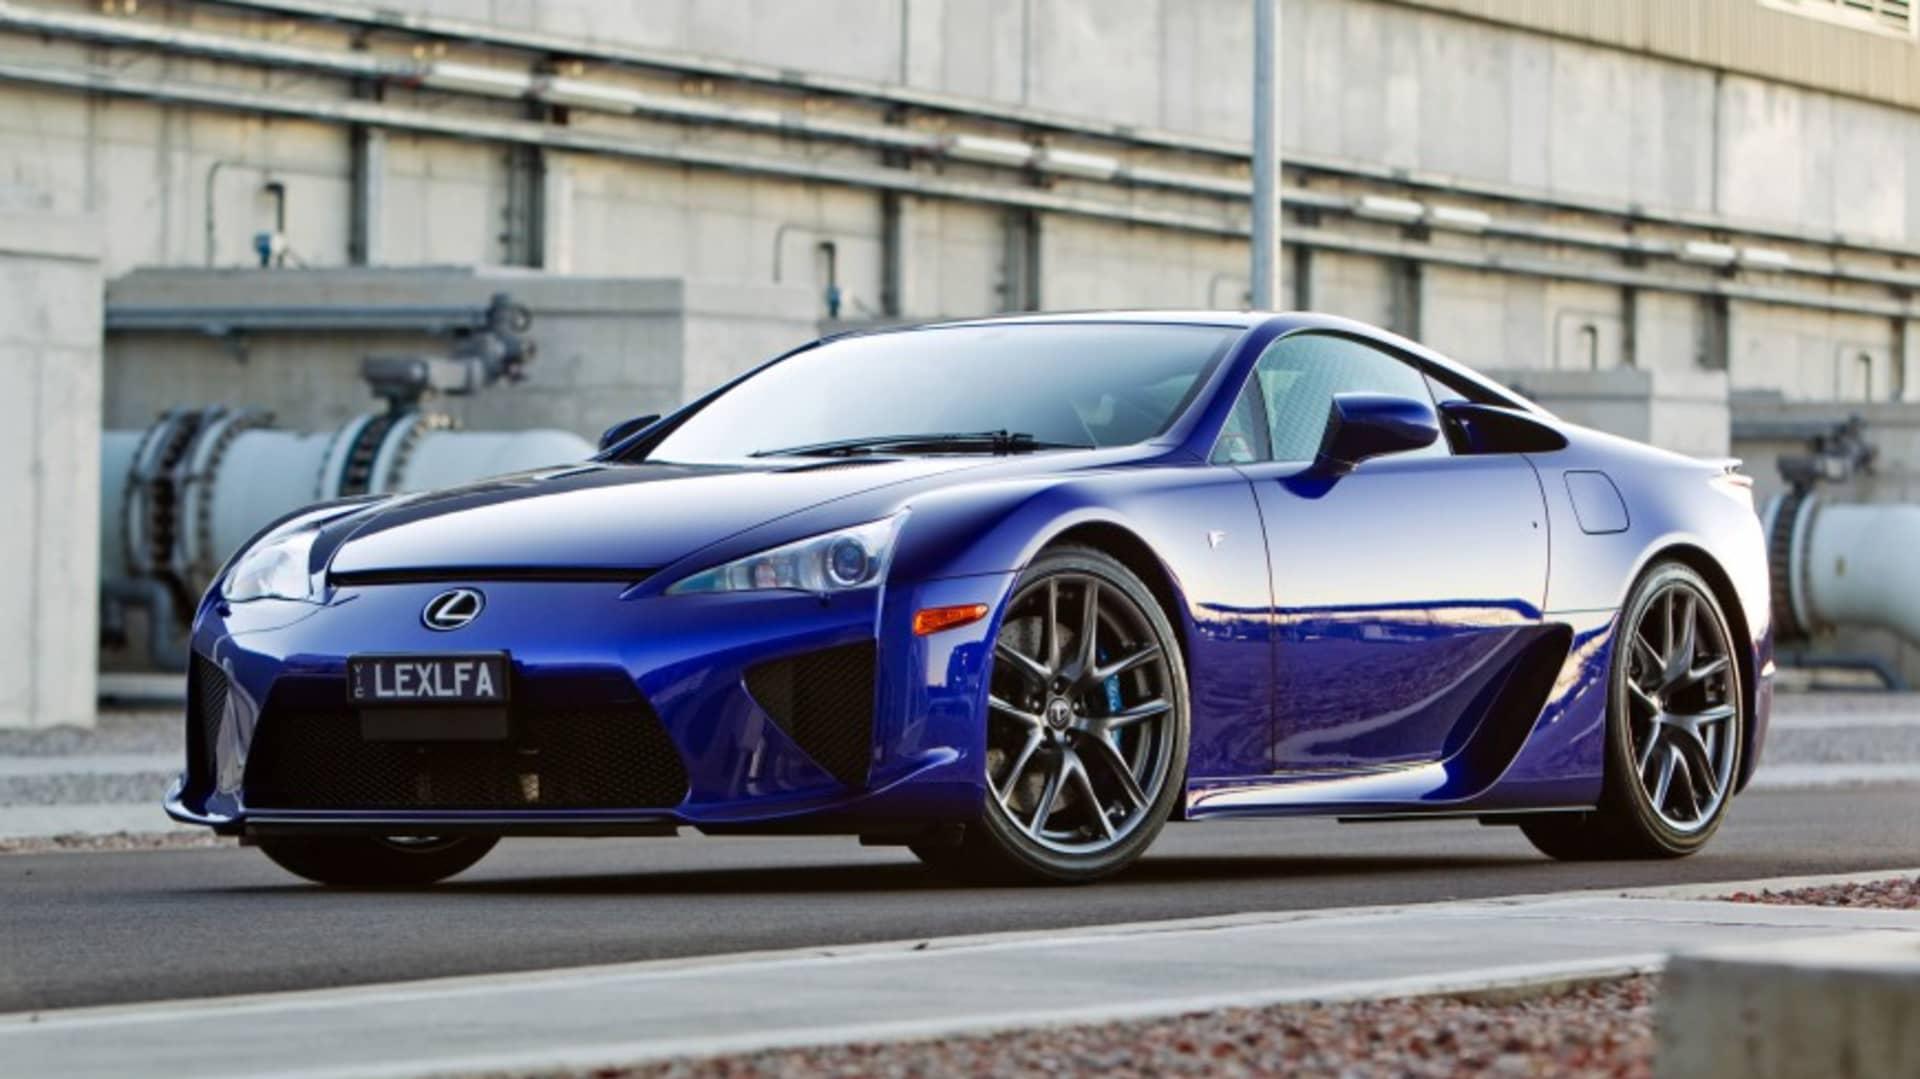 Lexus Lfa Successor Planned But Don T Hold Your Breath